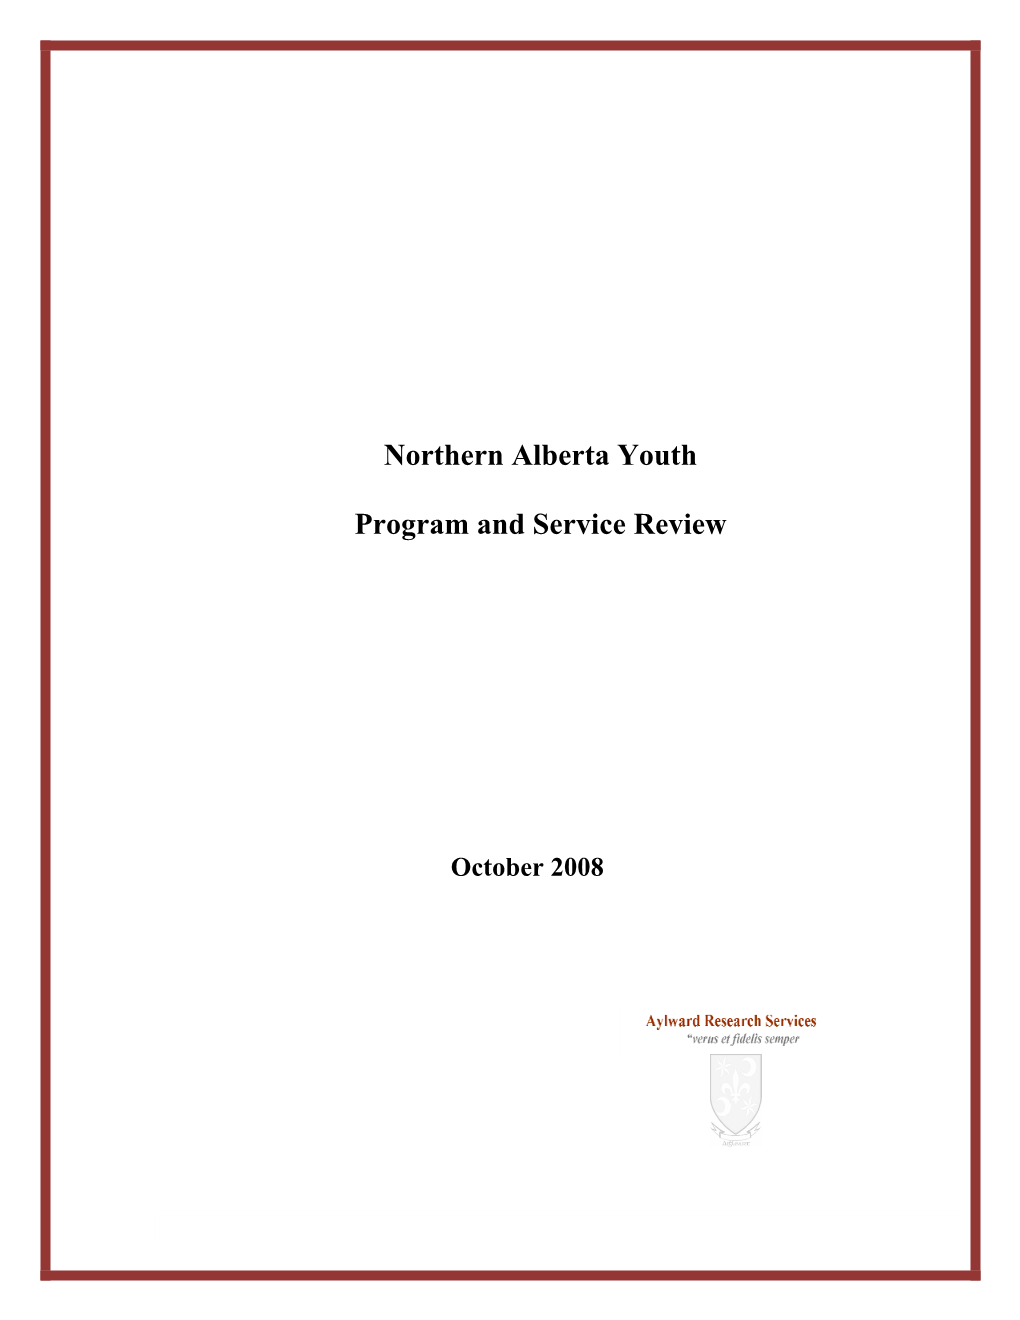 Northern Alberta Youth Program and Service Review